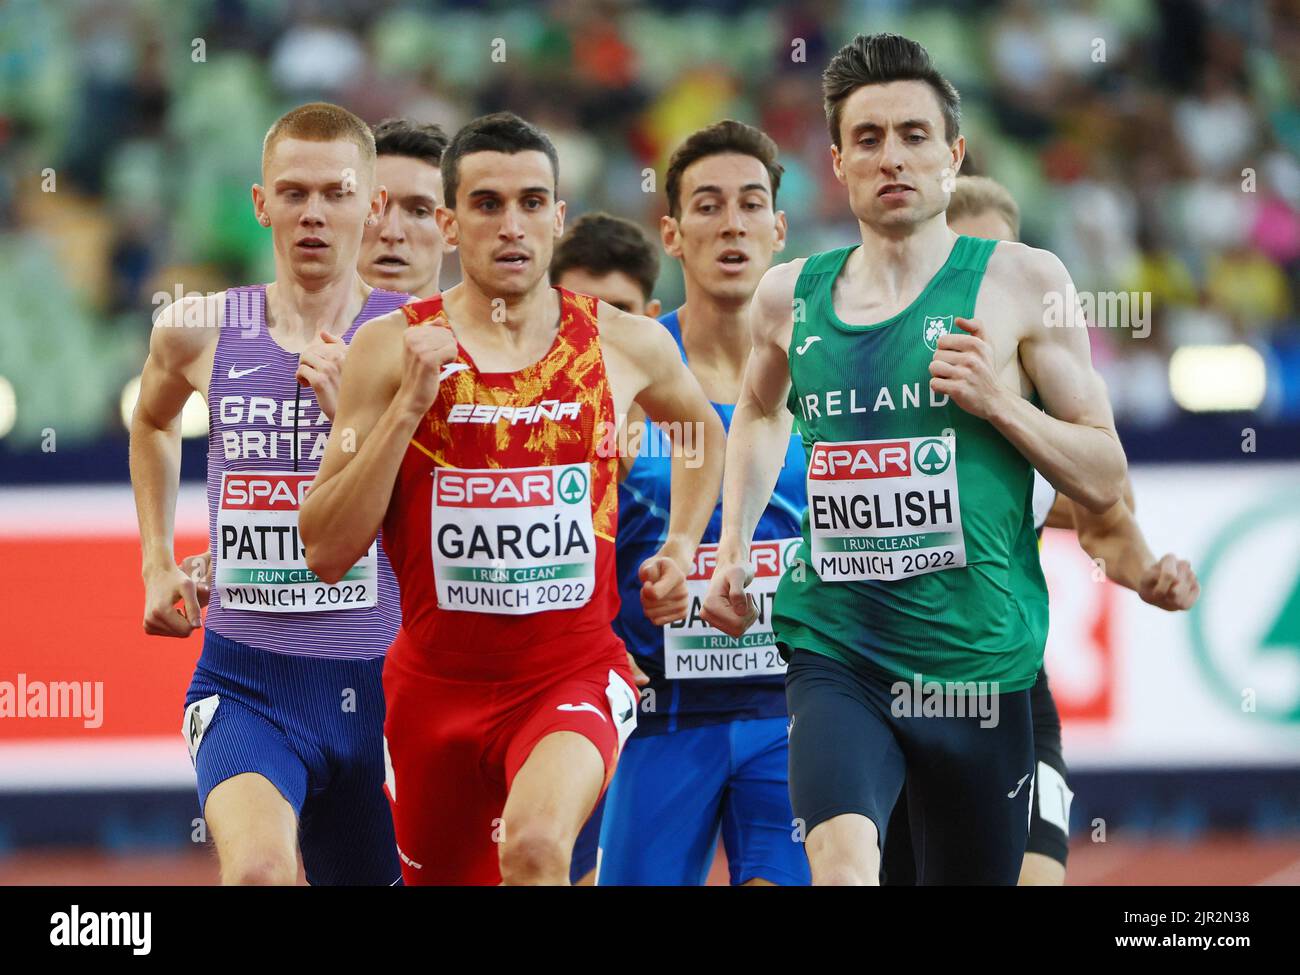 2022 European Championships - Athletics - Olympiastadion, Munich, Germany - August 21, 2022 Ireland's Mark English and Spain's Mariano Garcia in action during the men's 800m final REUTERS/Wolfgang Rattay Stock Photo